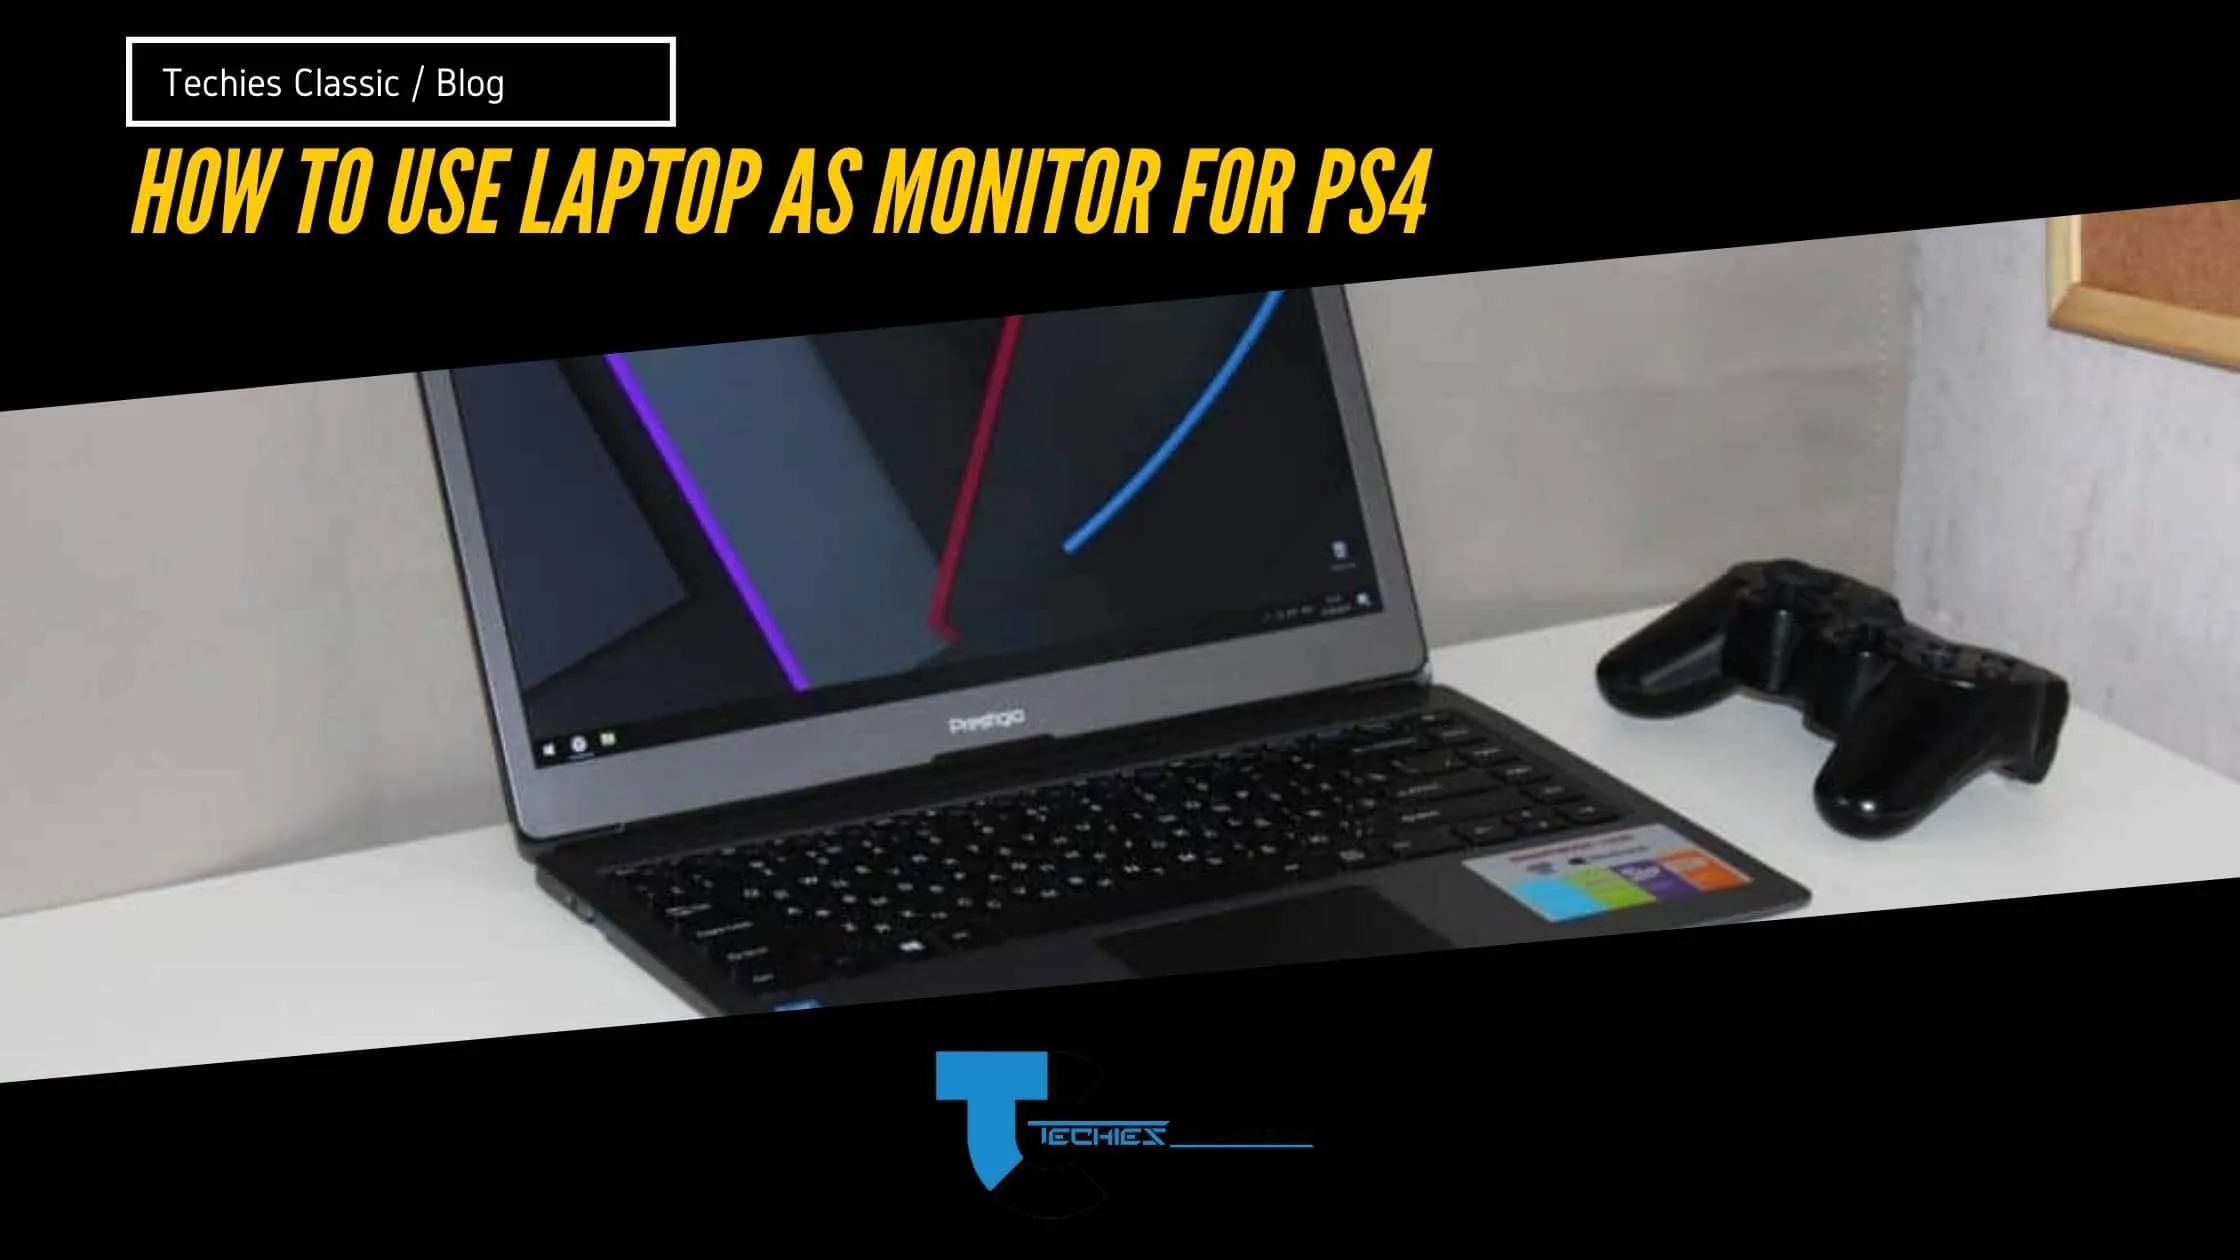 How to use laptop as monitor for ps4